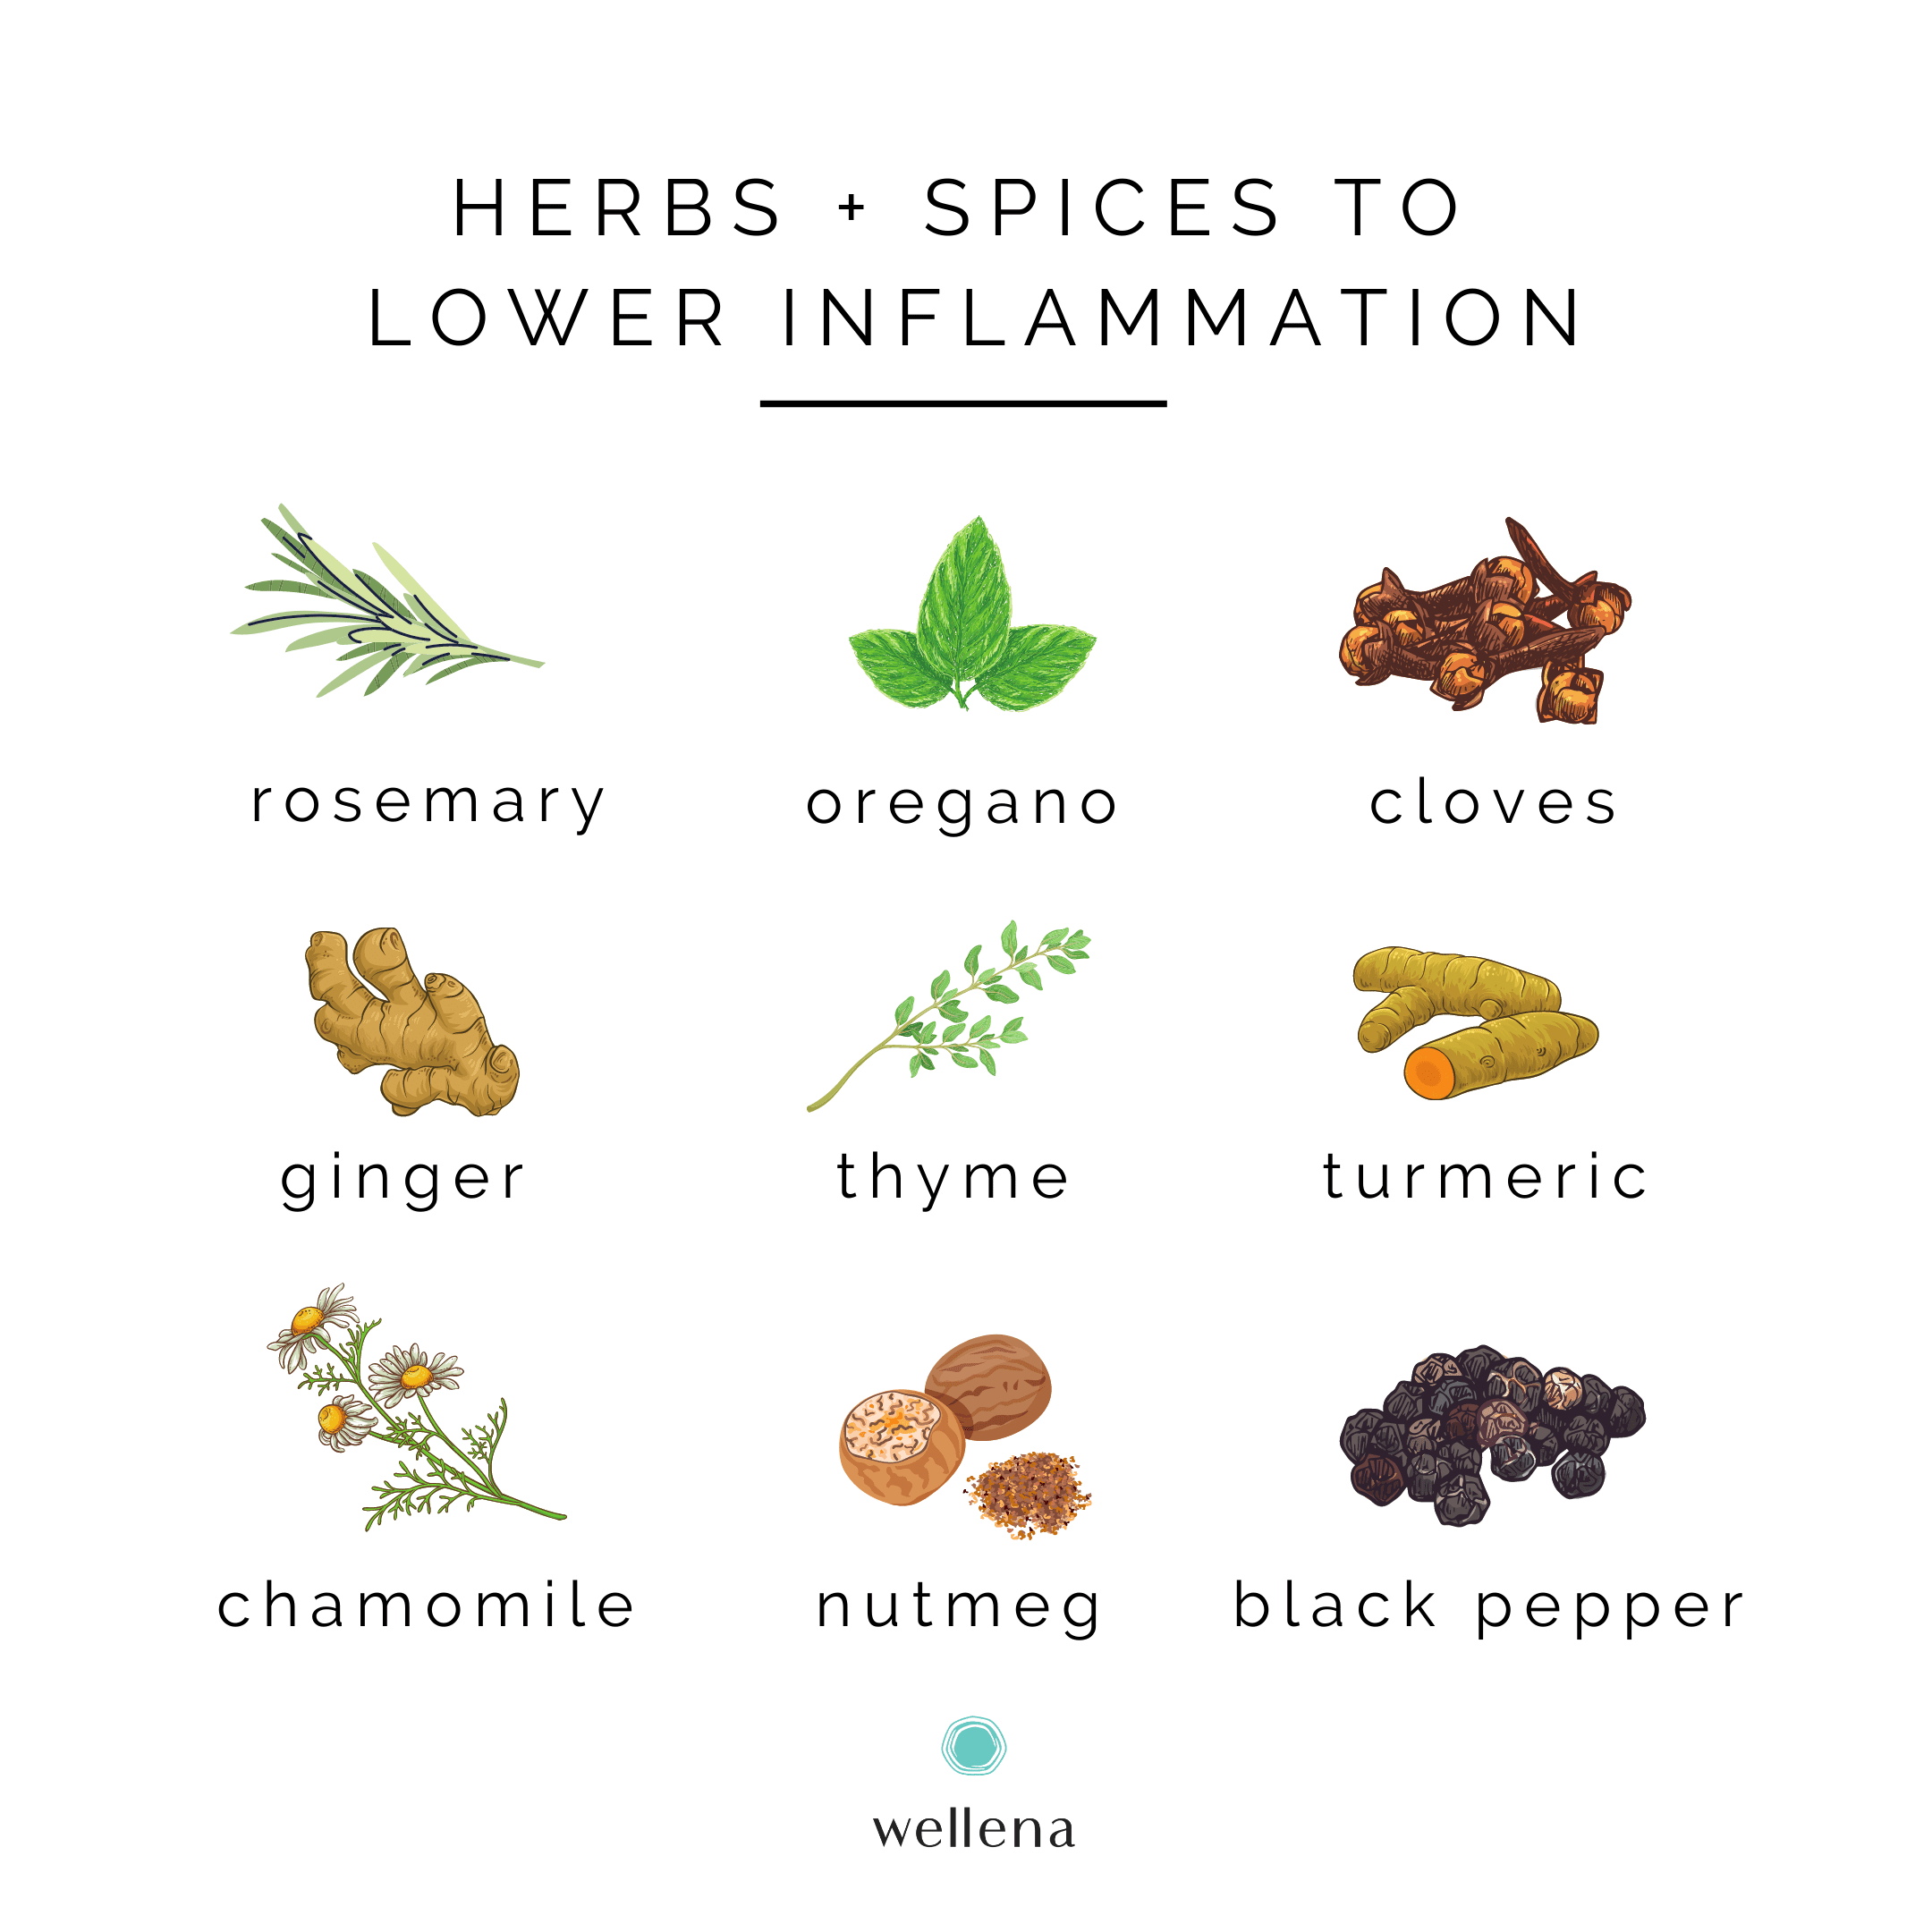 Certain herbs and spices can also help lower inflammation, such as rosemary, oregano, thyme, chamomile, ginger, nutmeg, cloves, black pepper, and turmeric. Try to incorporate fresh herbs and spices into your diet whenever you can. Not only will your food taste spectacular, but your body will thank you, too!